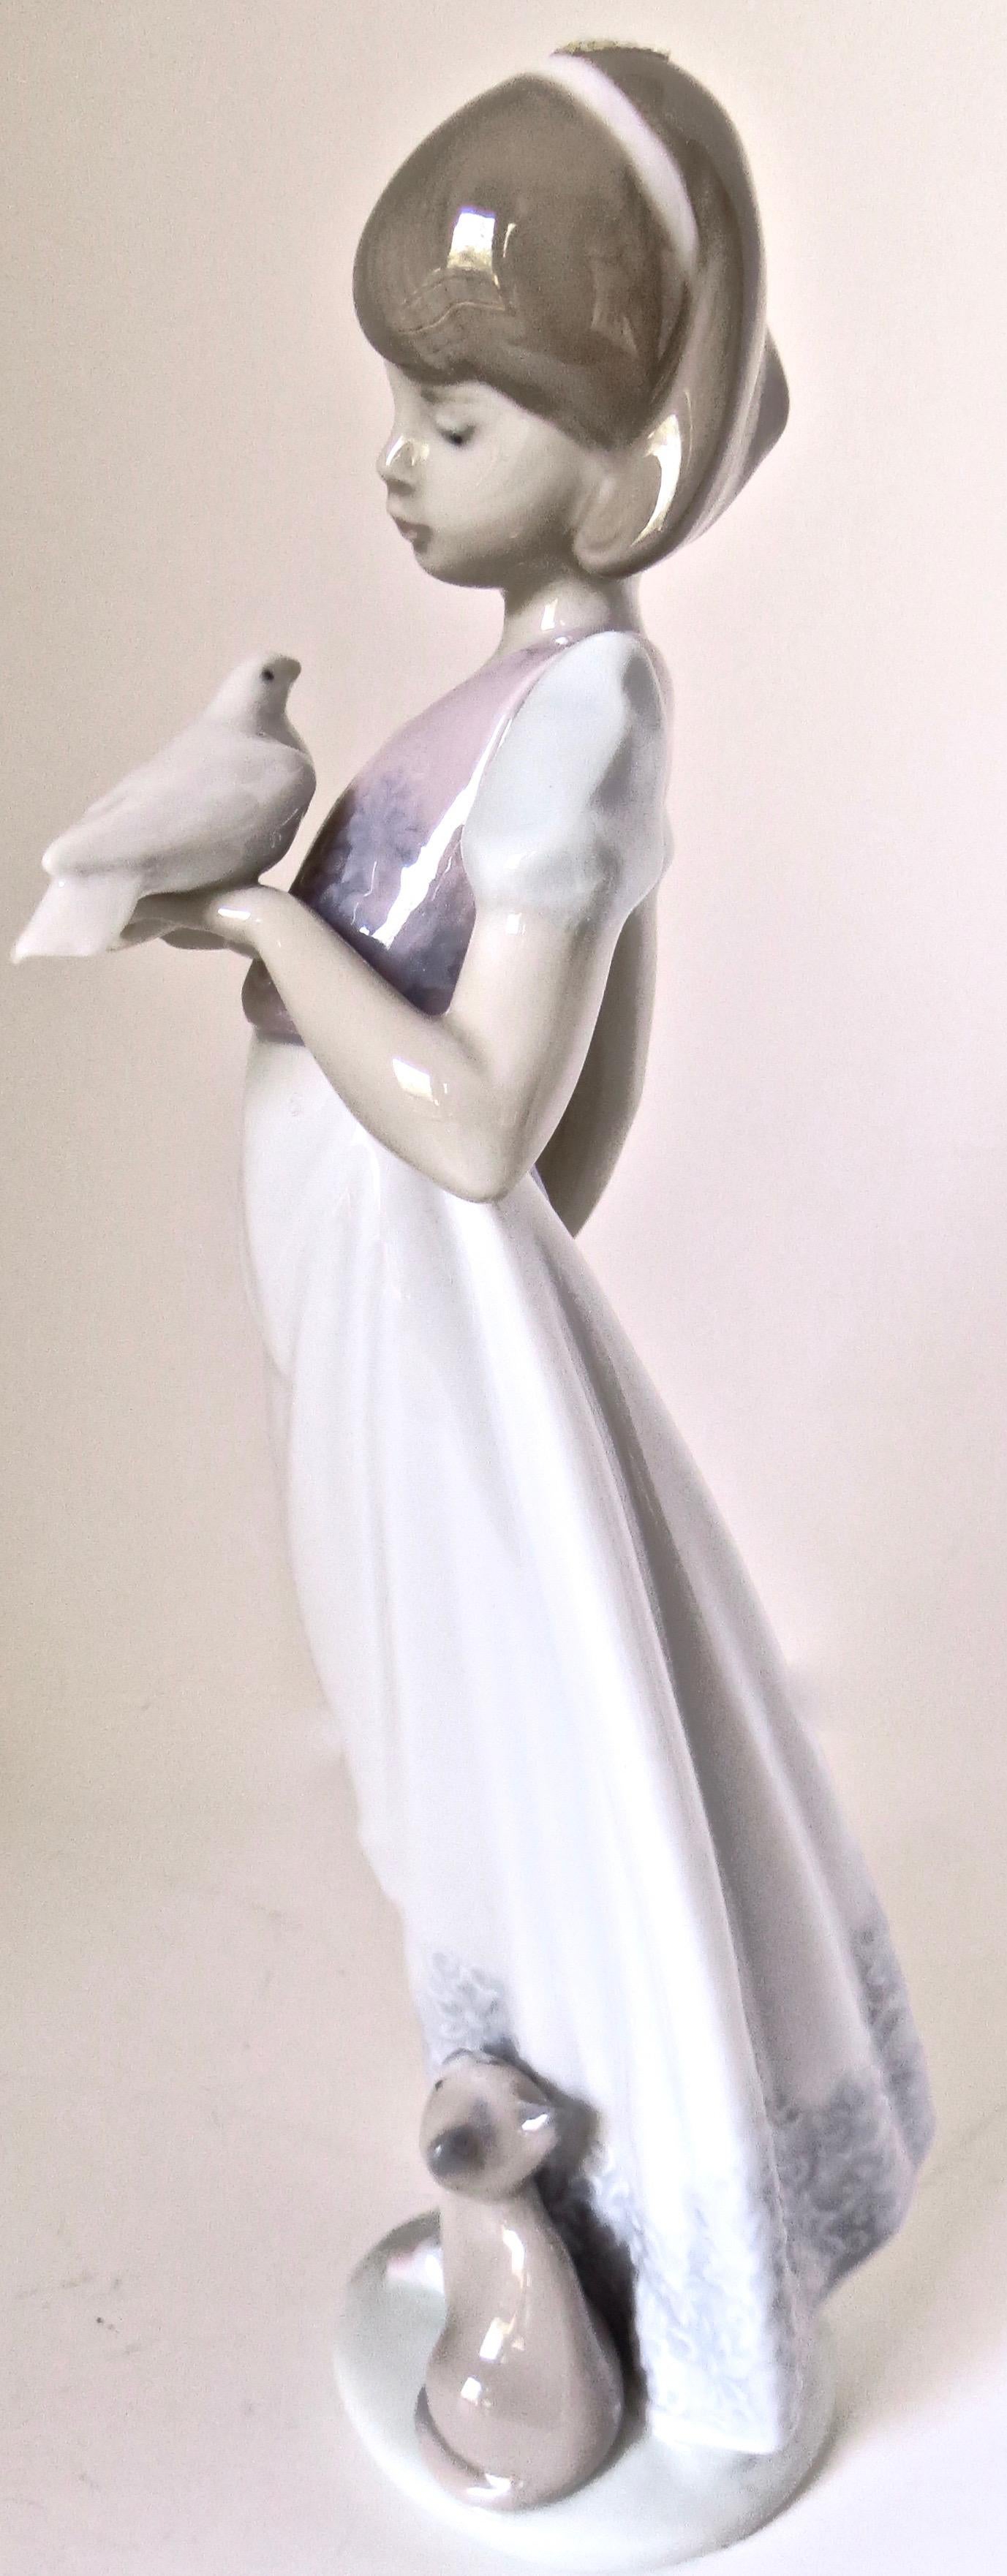 This was a limited edition hand painted porcelain made and retired in 1991 by Lladro in Spain. Designed and sculpted by world renowned artist, Juan Huerta, it is entitled 